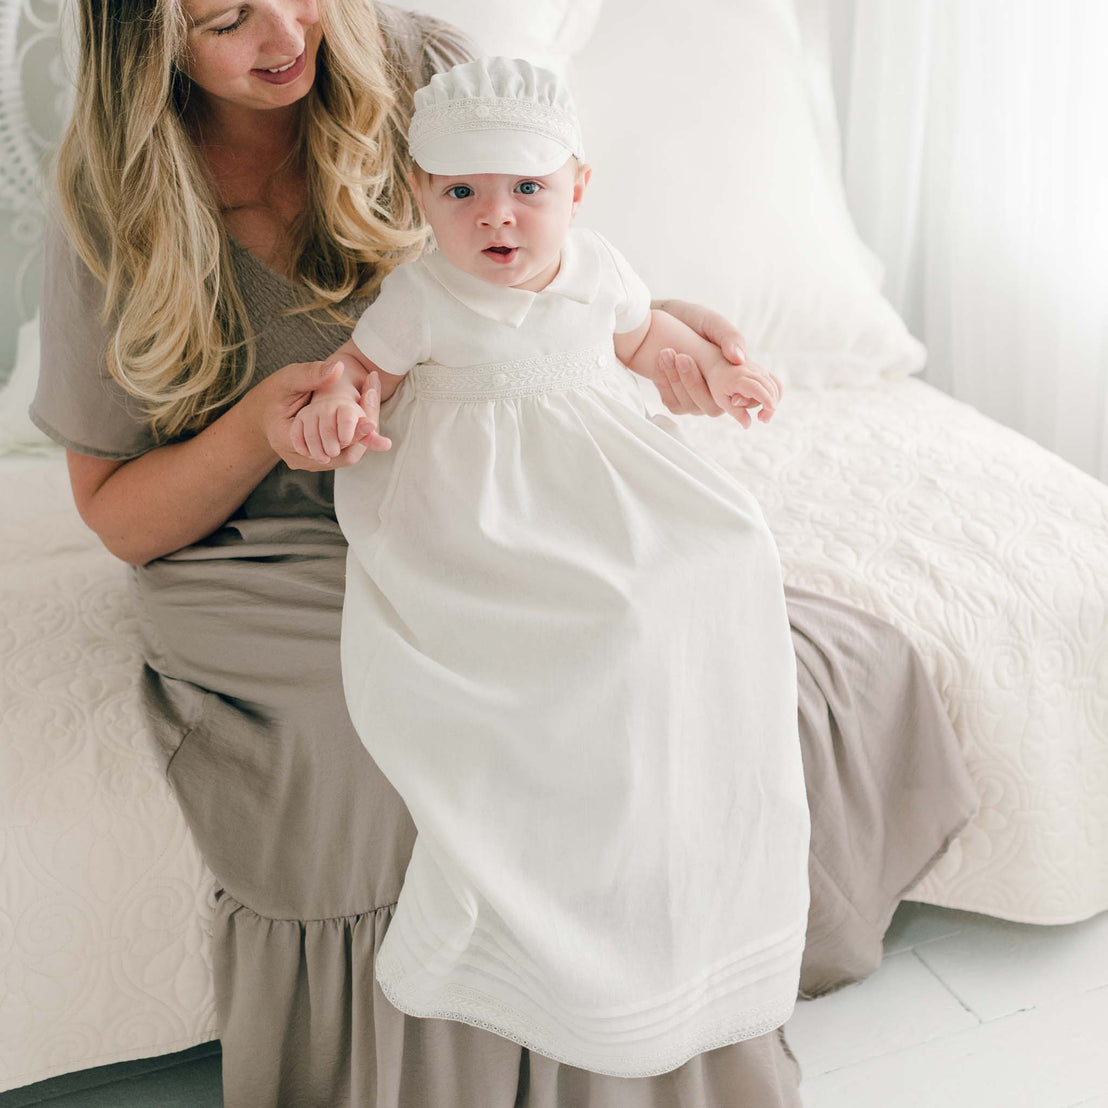 A woman sits on a bed, holding the hands of a baby who is standing on her lap. The baby is wearing an Oliver Convertible Gown | Romper & Skirt Set, while the woman smiles warmly in her long grey dress. The scene is bright and airy, with a white quilt and white curtains in the background.